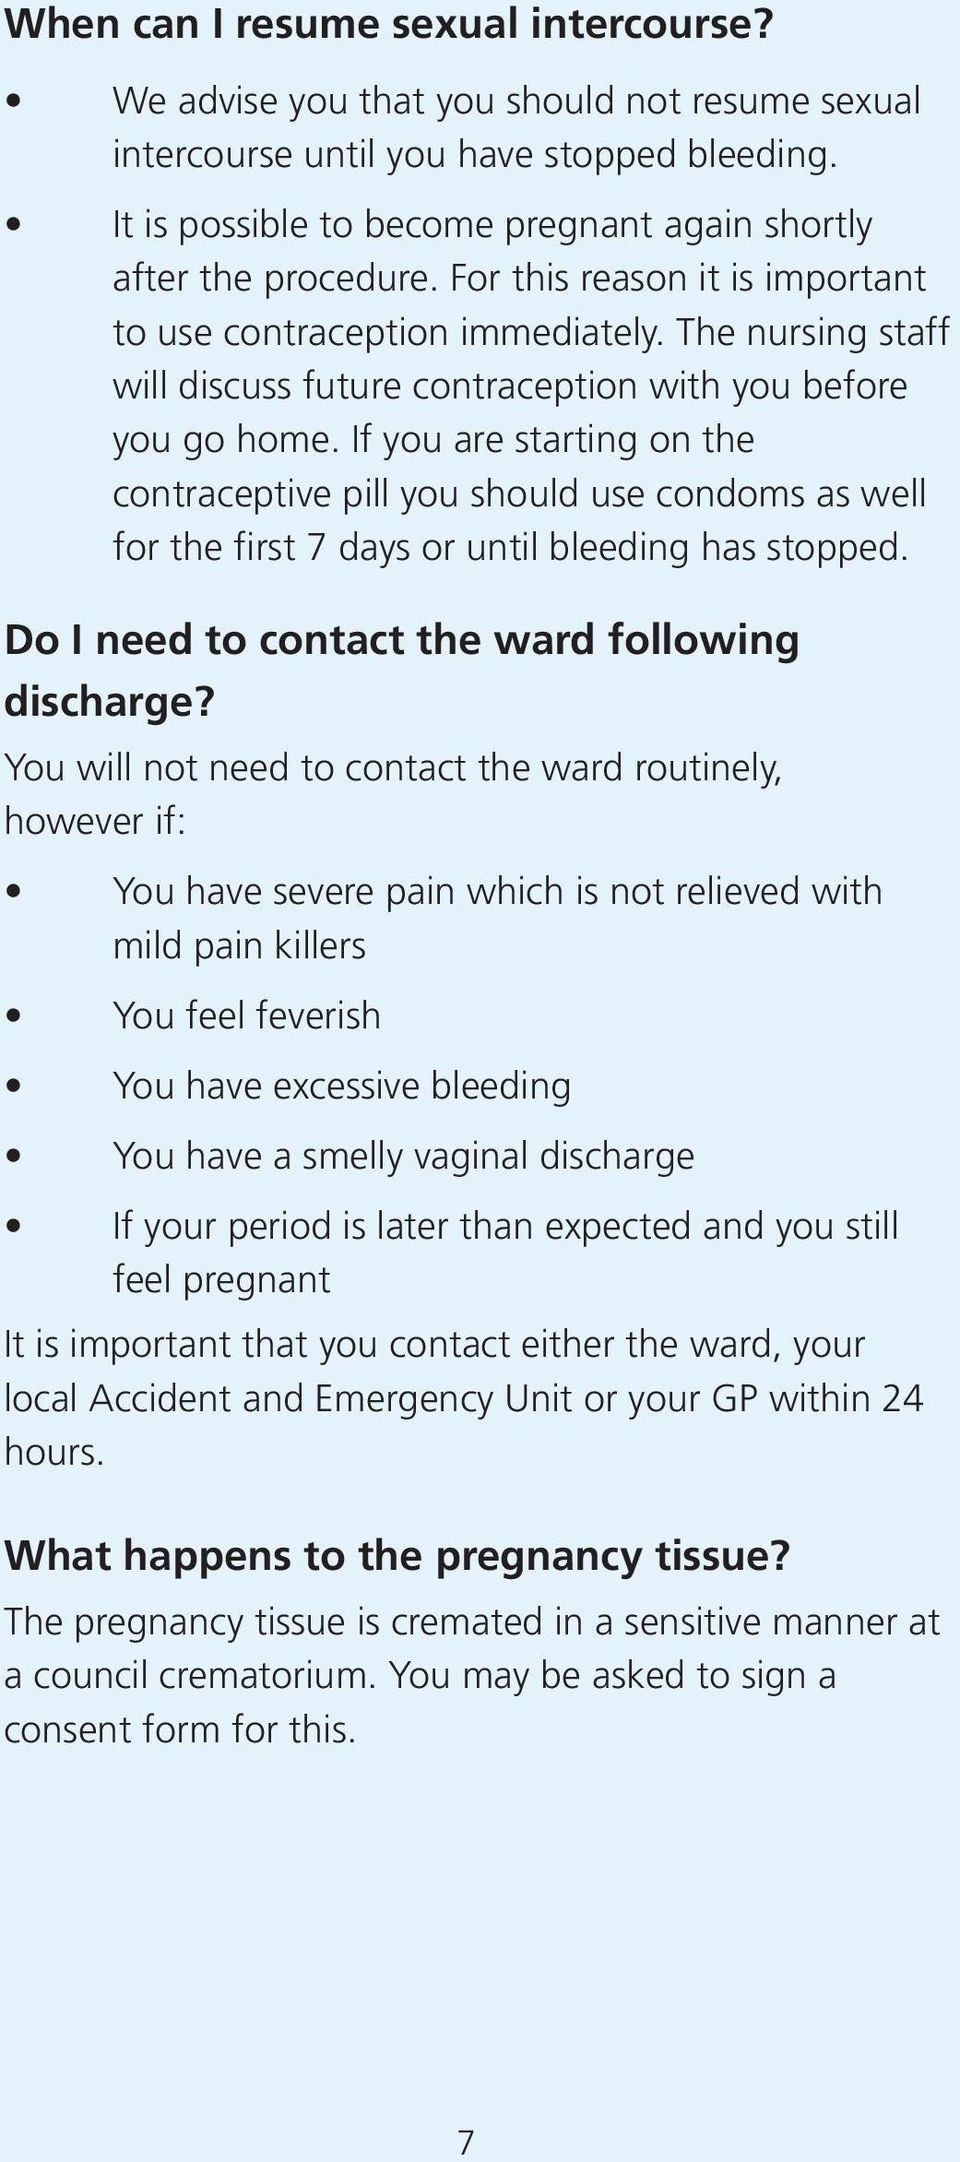 If you are starting on the contraceptive pill you should use condoms as well for the first 7 days or until bleeding has stopped. Do I need to contact the ward following discharge?